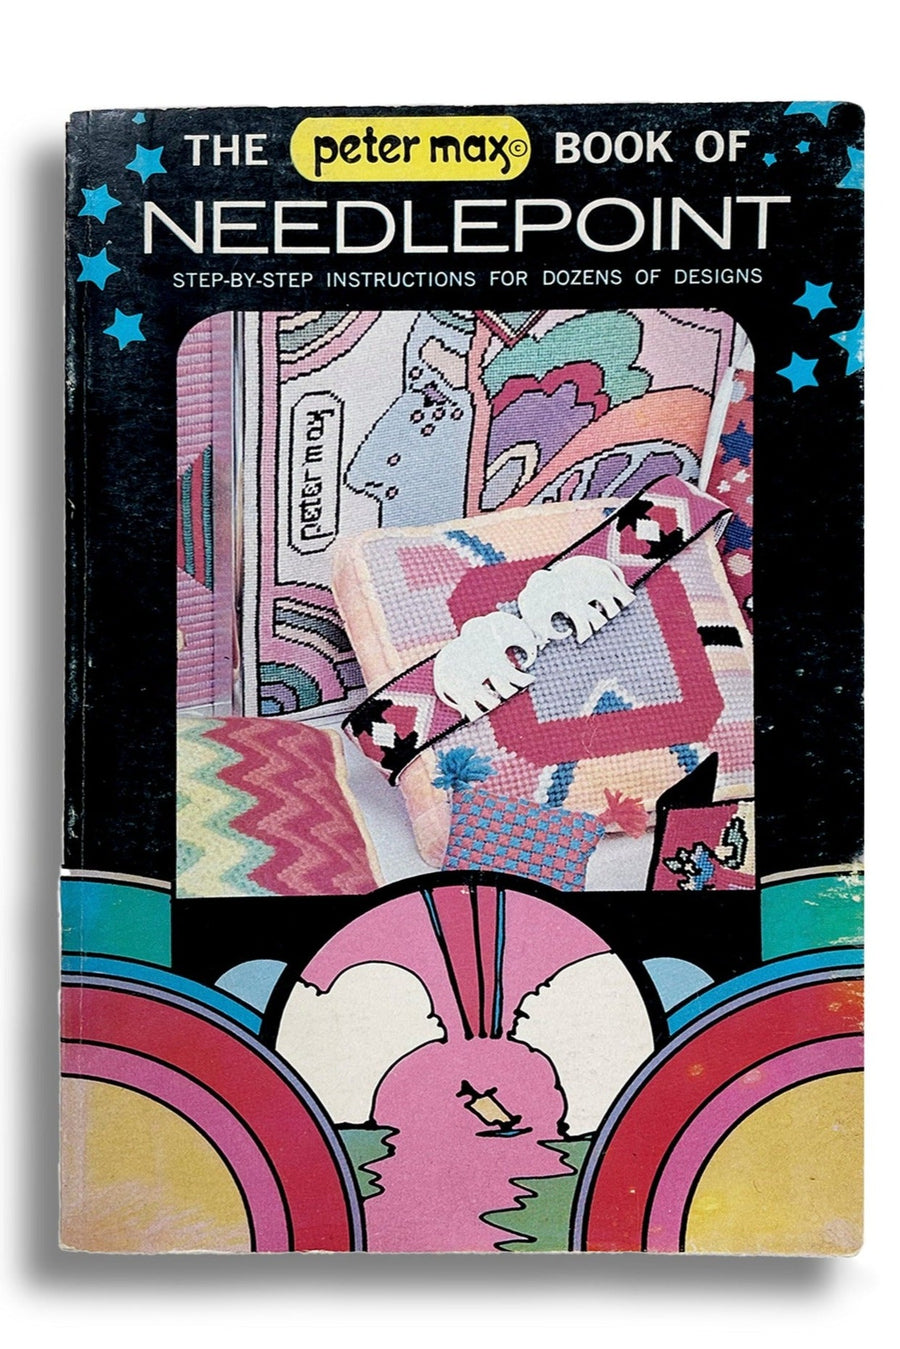 The Peter Max Book of Needlepoint